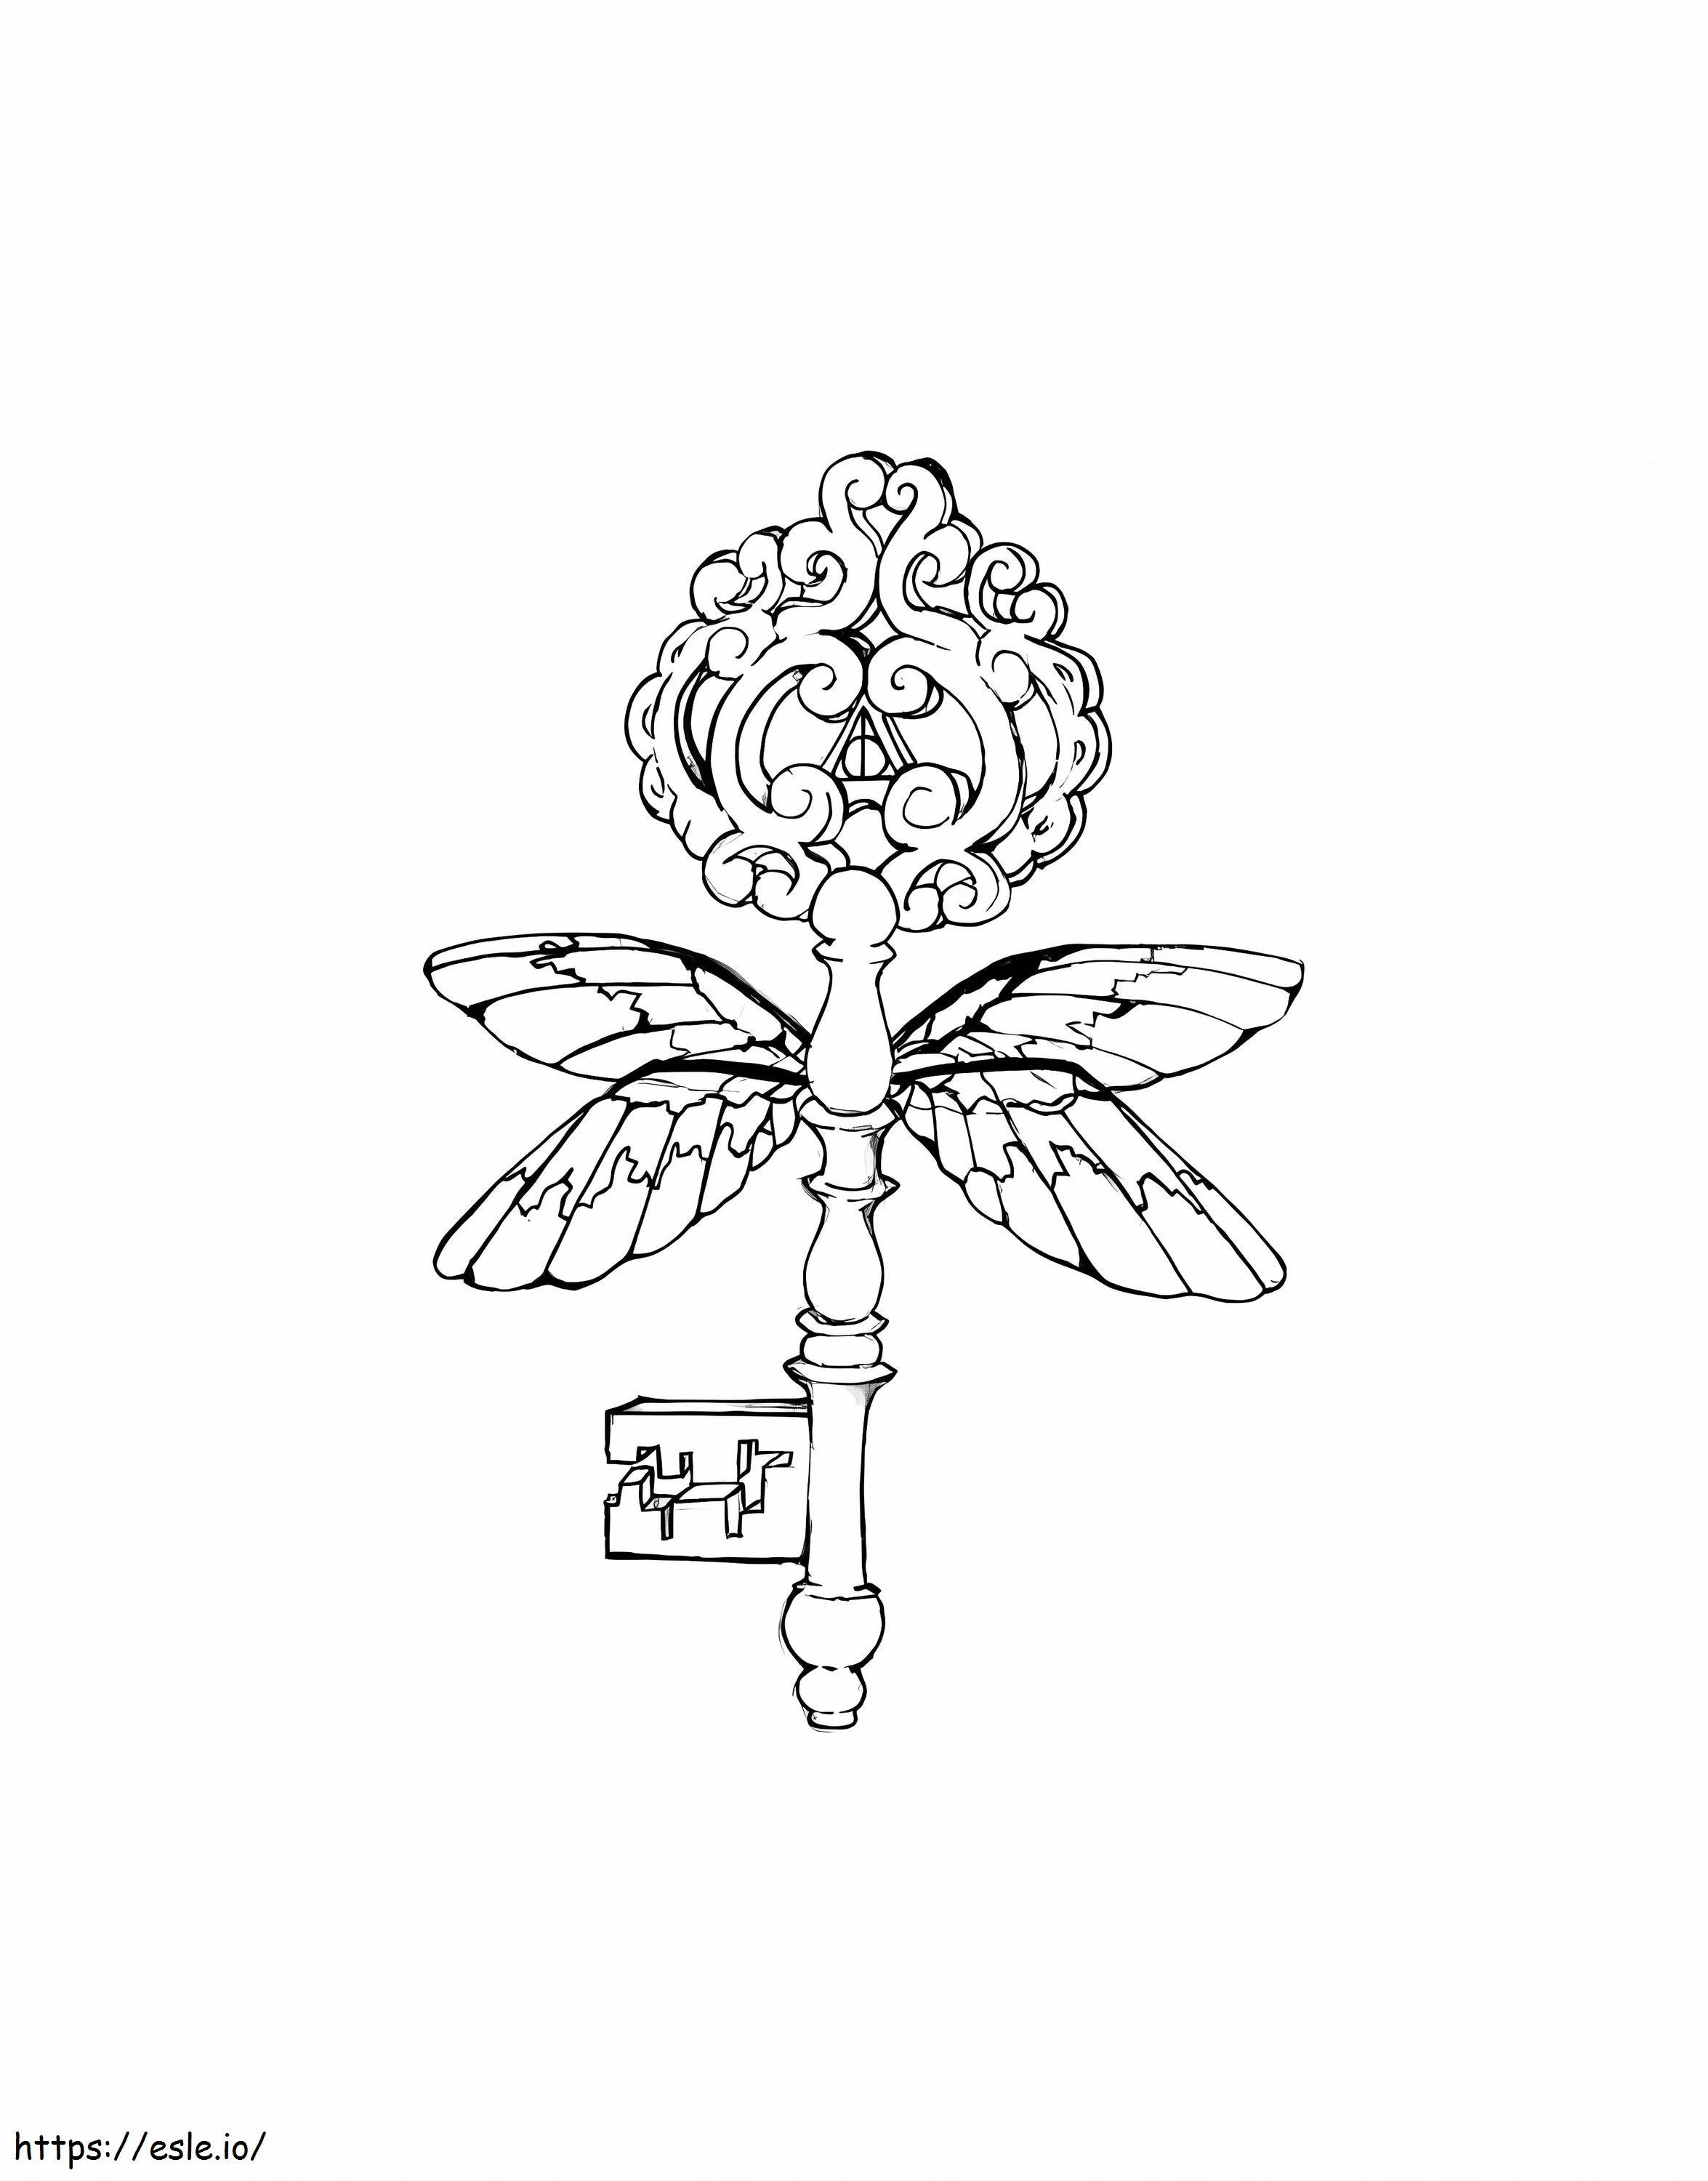 Harry Potter Winged Flying Key coloring page